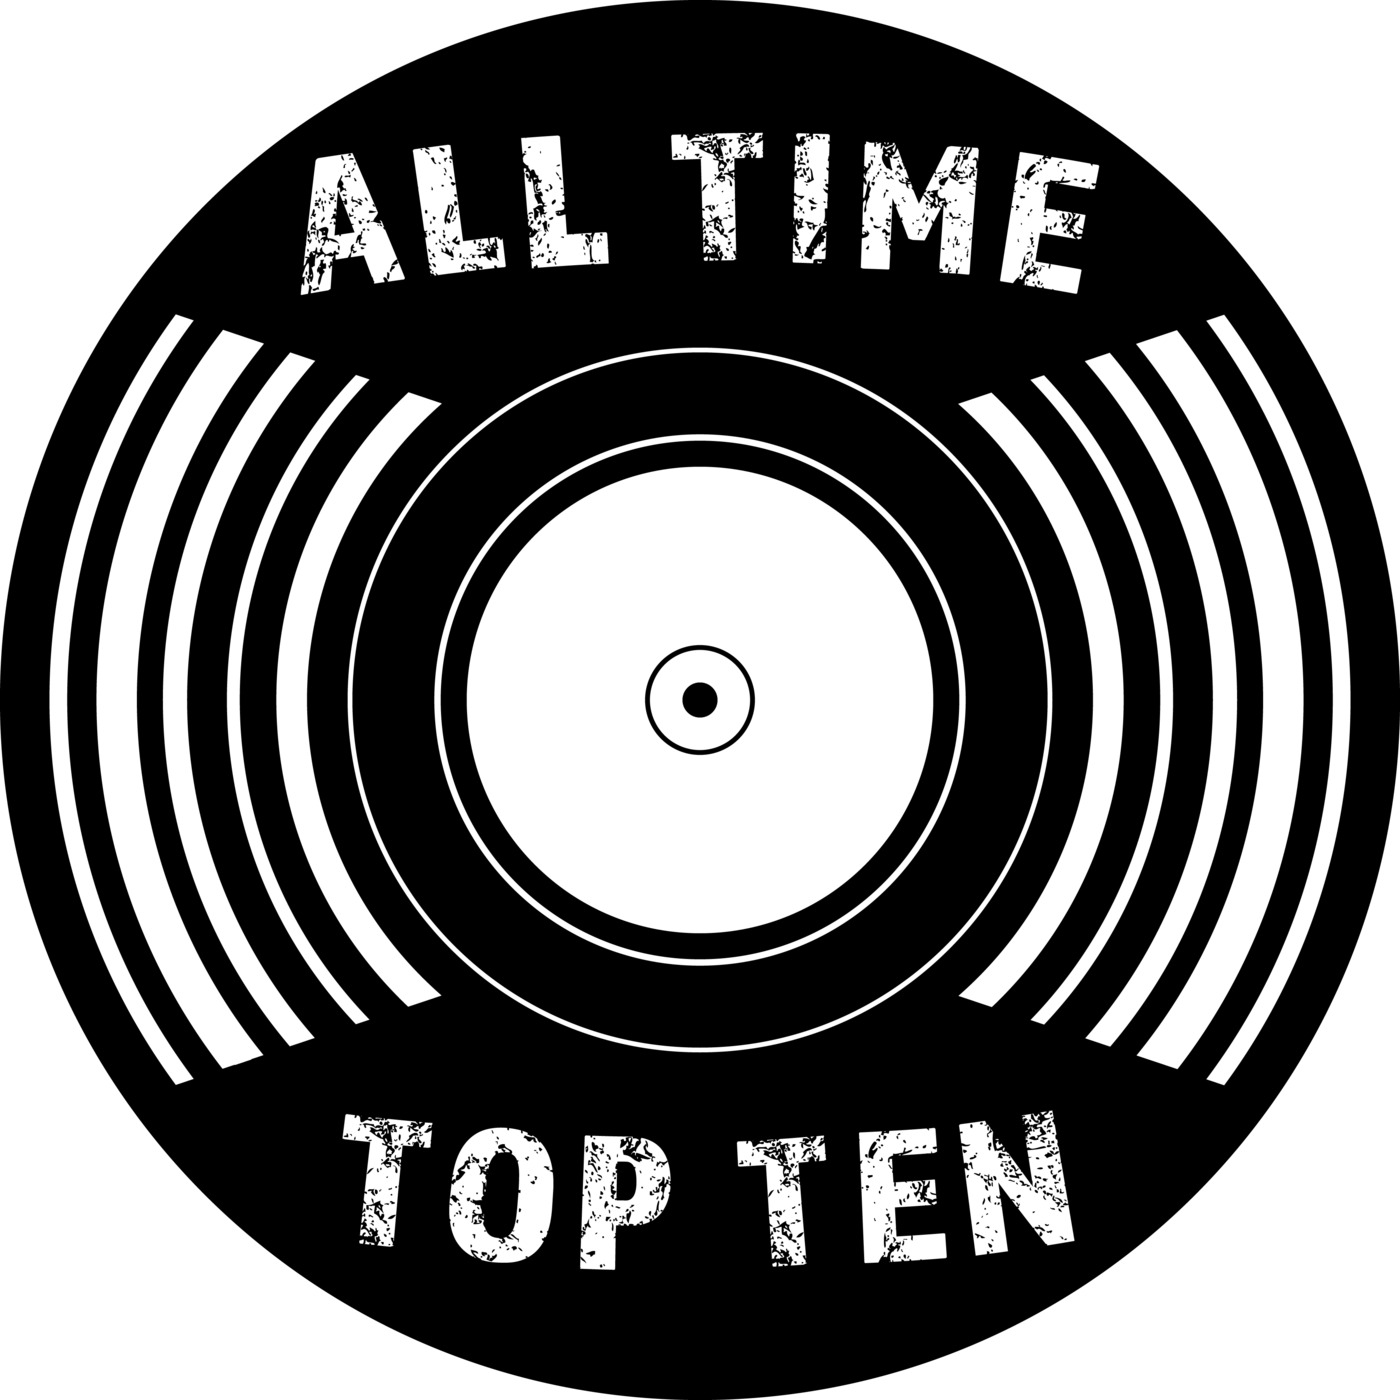 All Time Top Ten